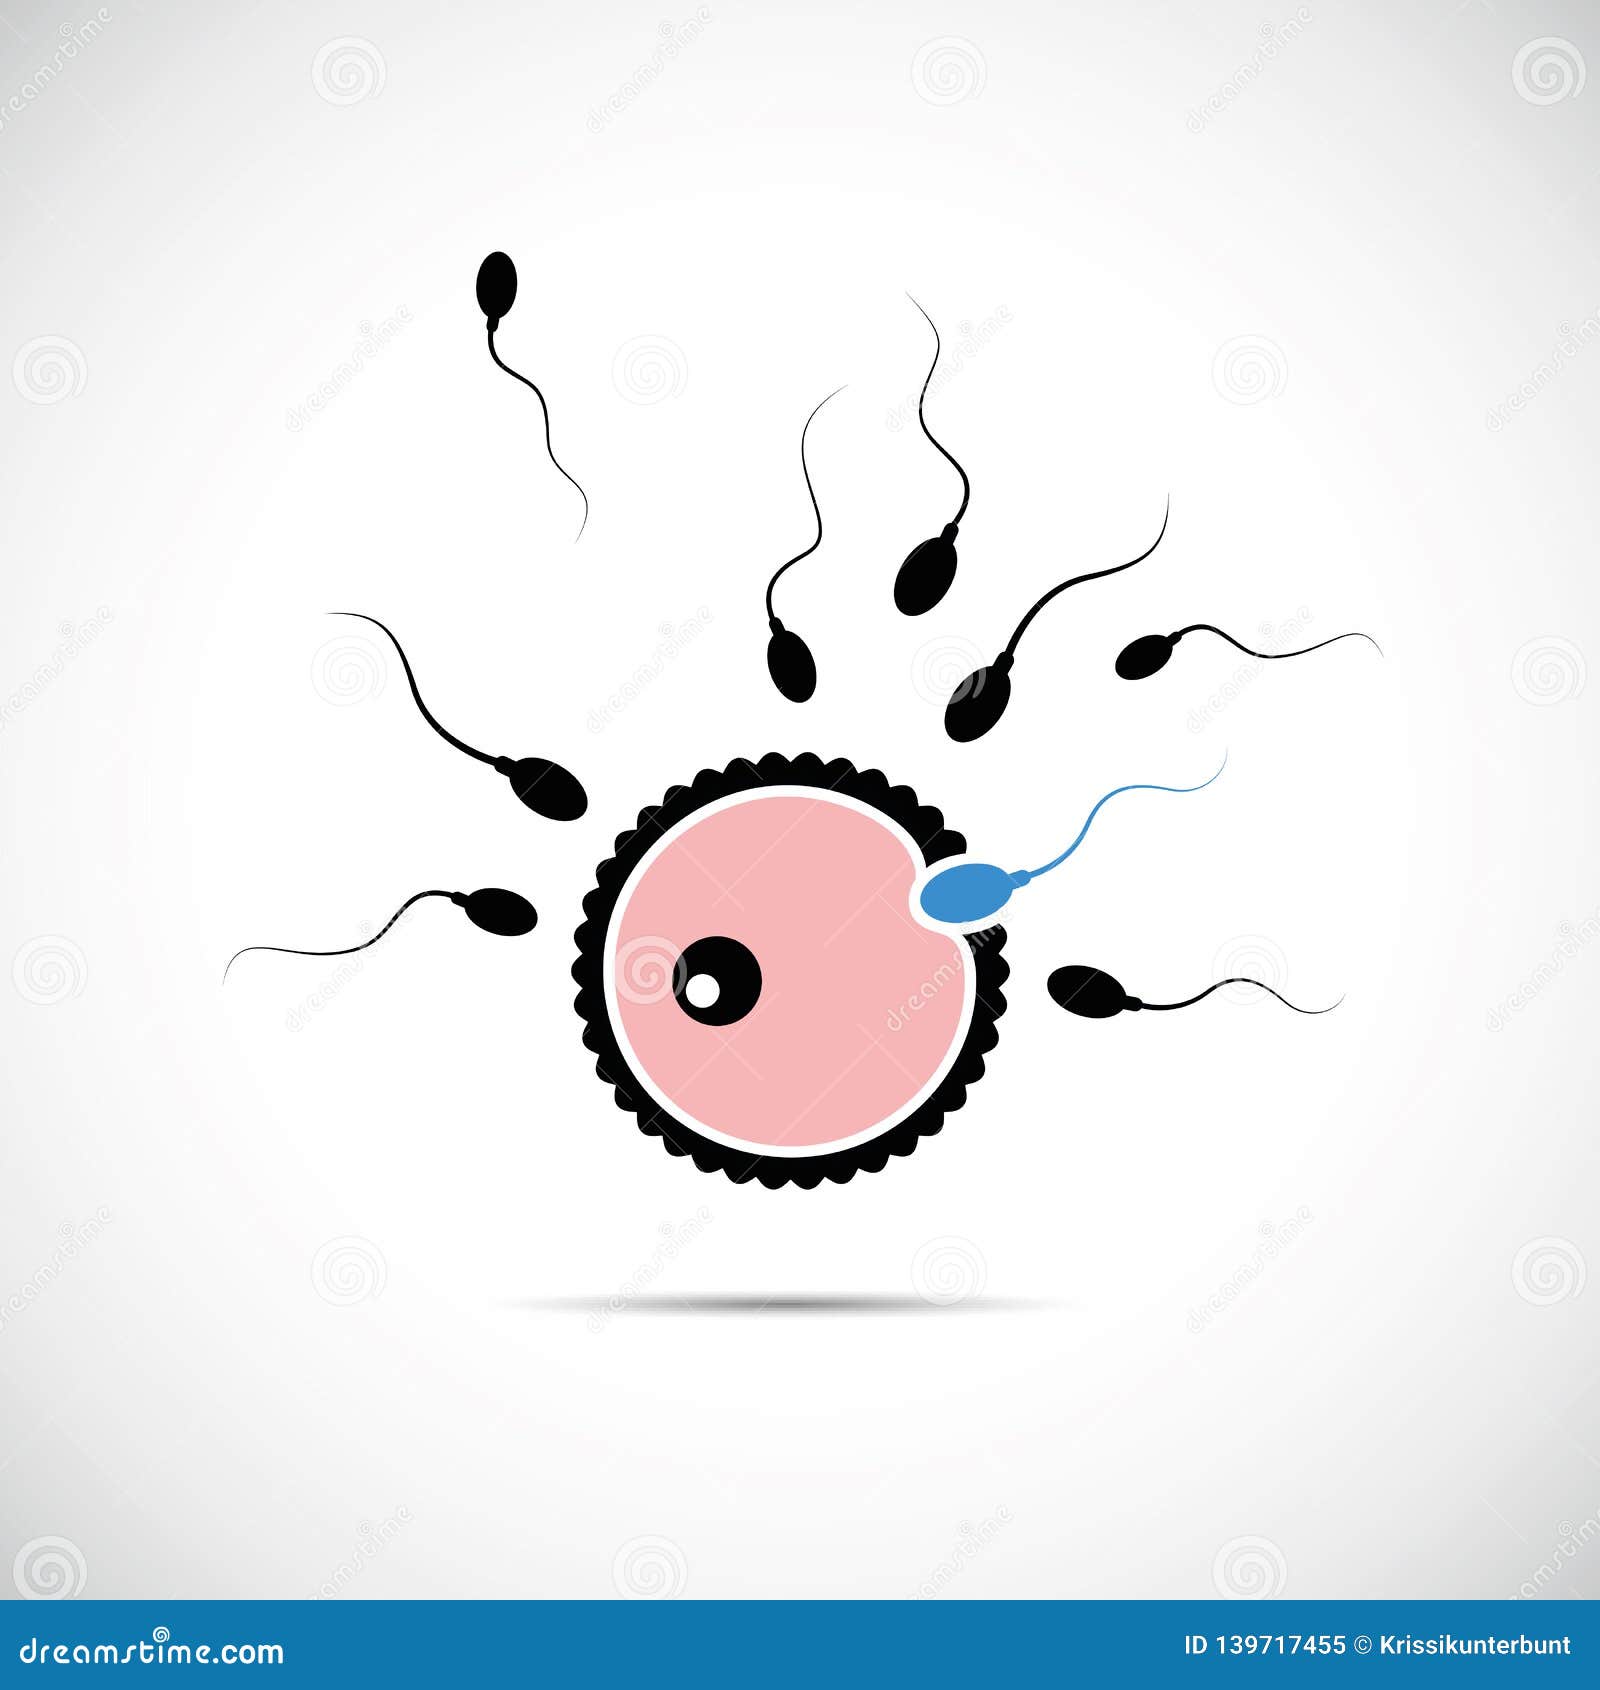 fertility reproduction of ovum and spermatozoon blue